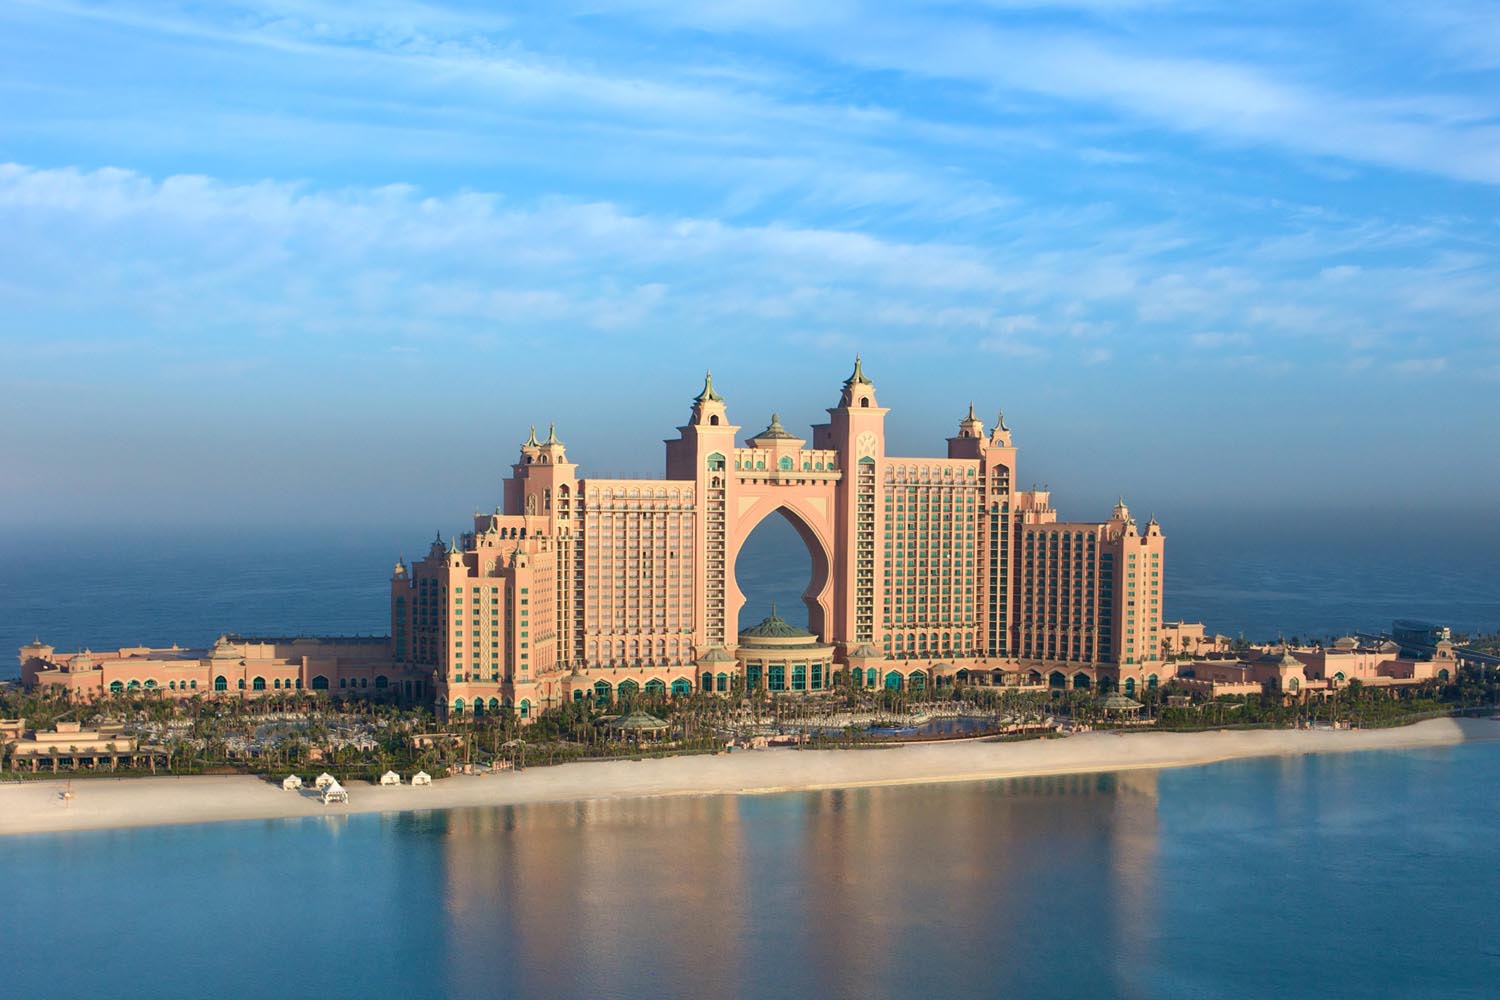 hotels-rooms-in-dubai-12075-hd-wallpapers